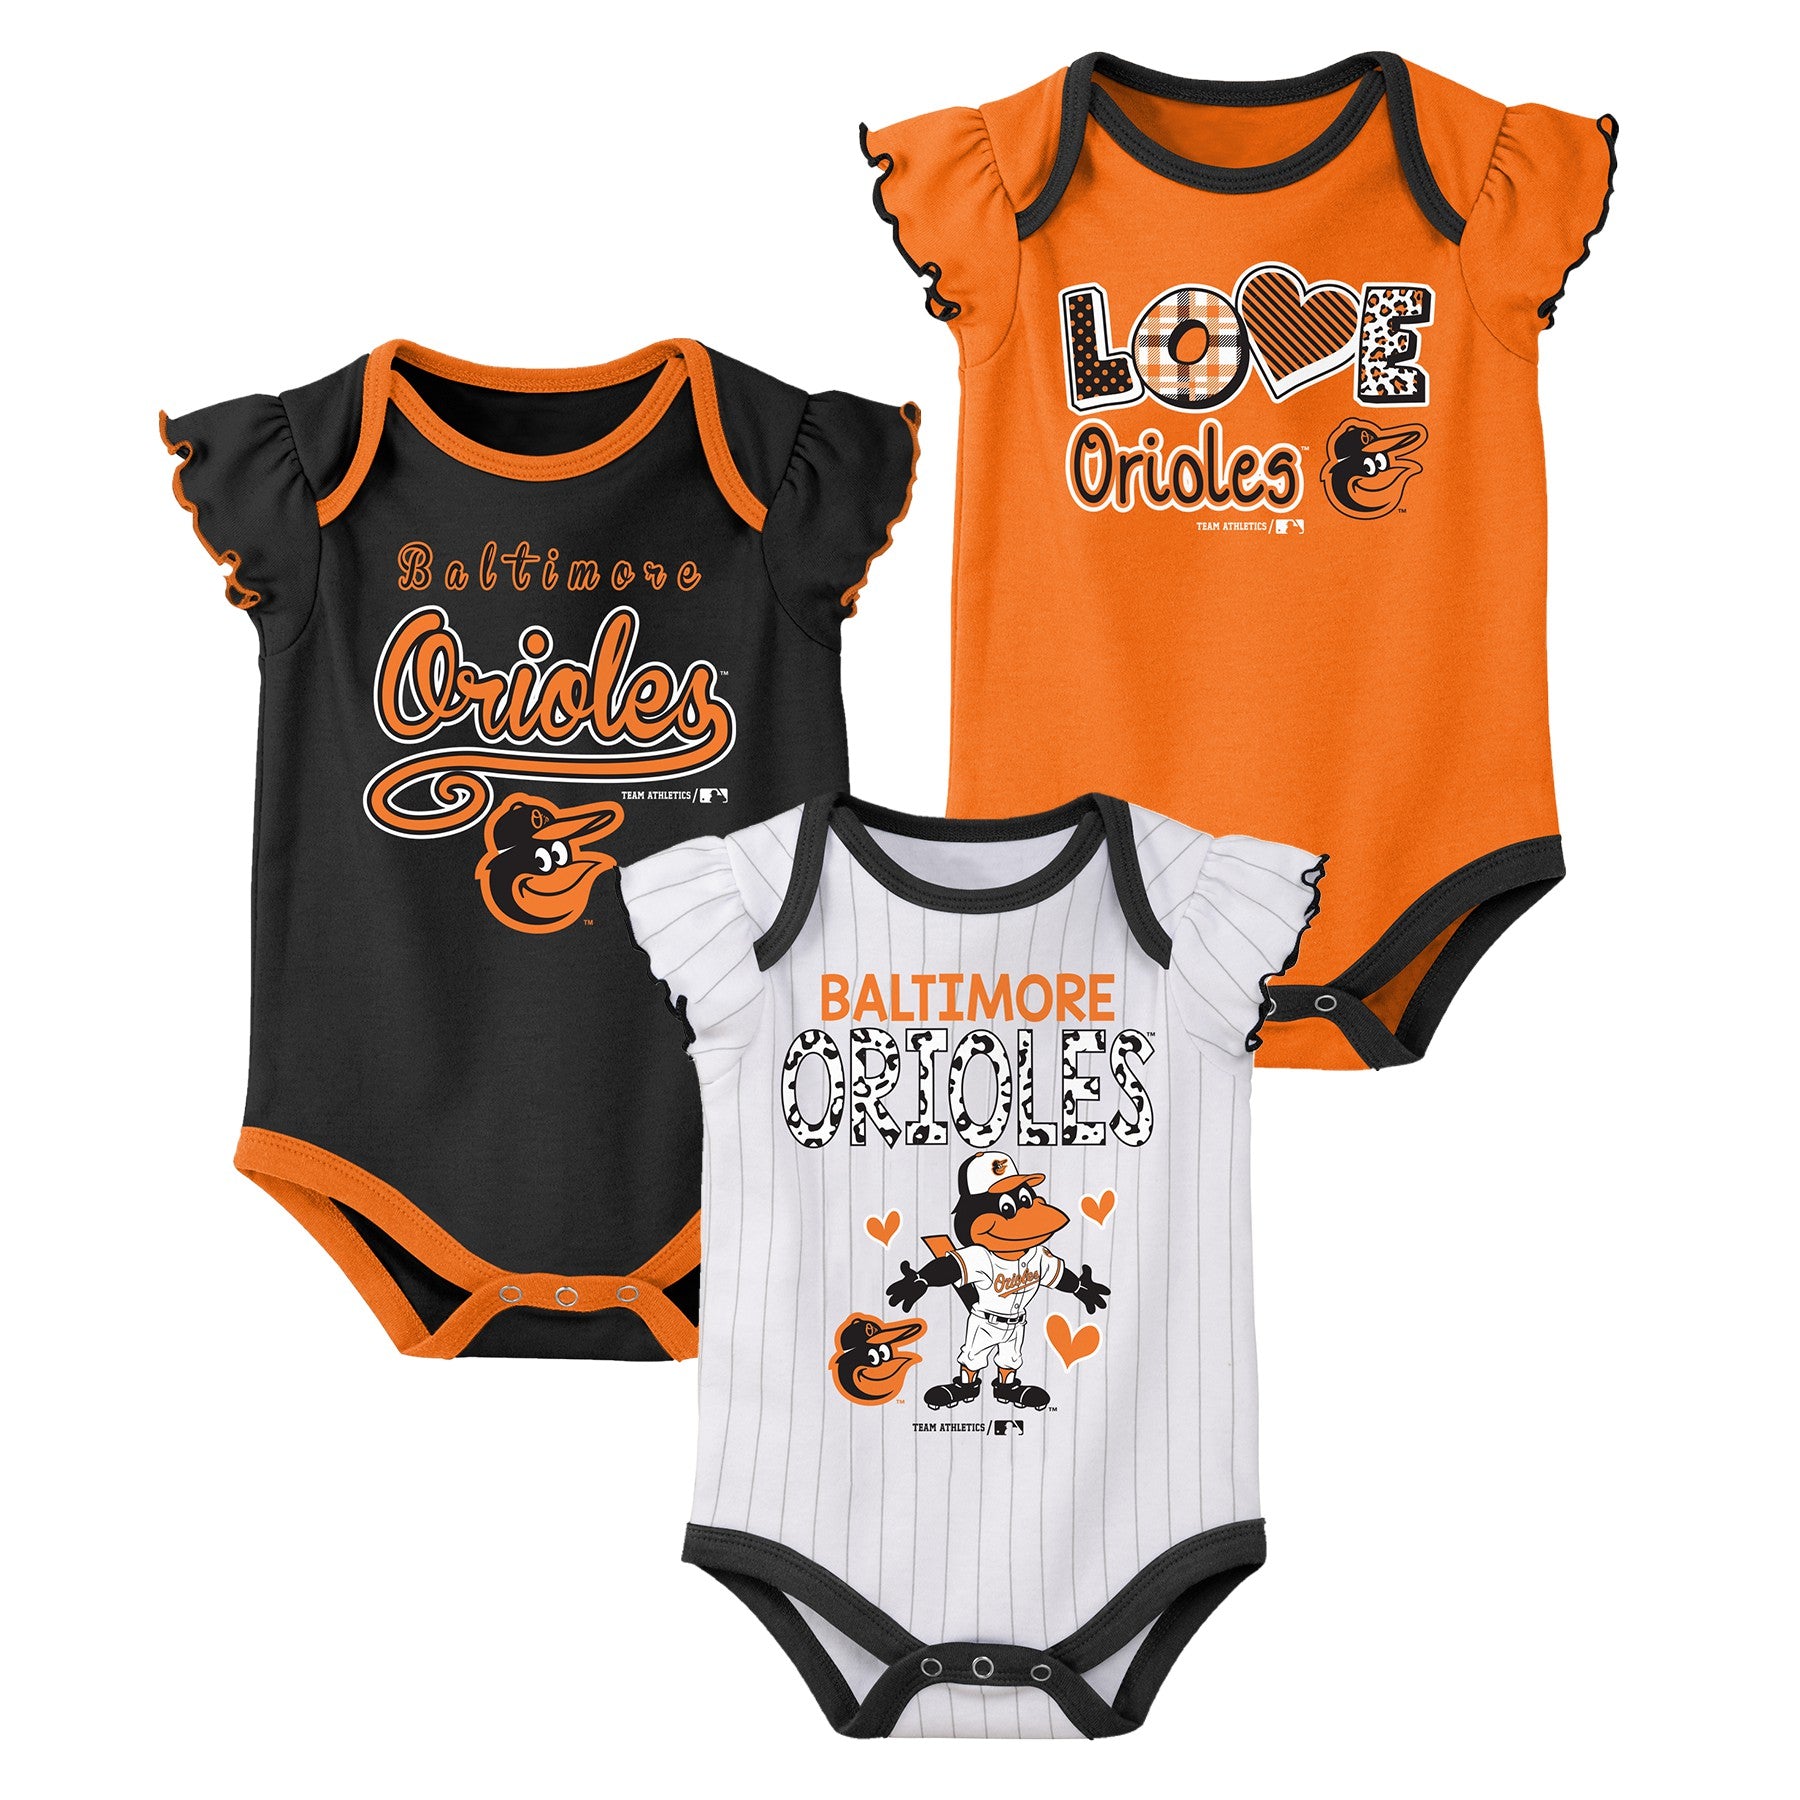 MLB Infant Girls’ 3-Pack Bodysuits - Baltimore Orioles, Size: 0-3 Months